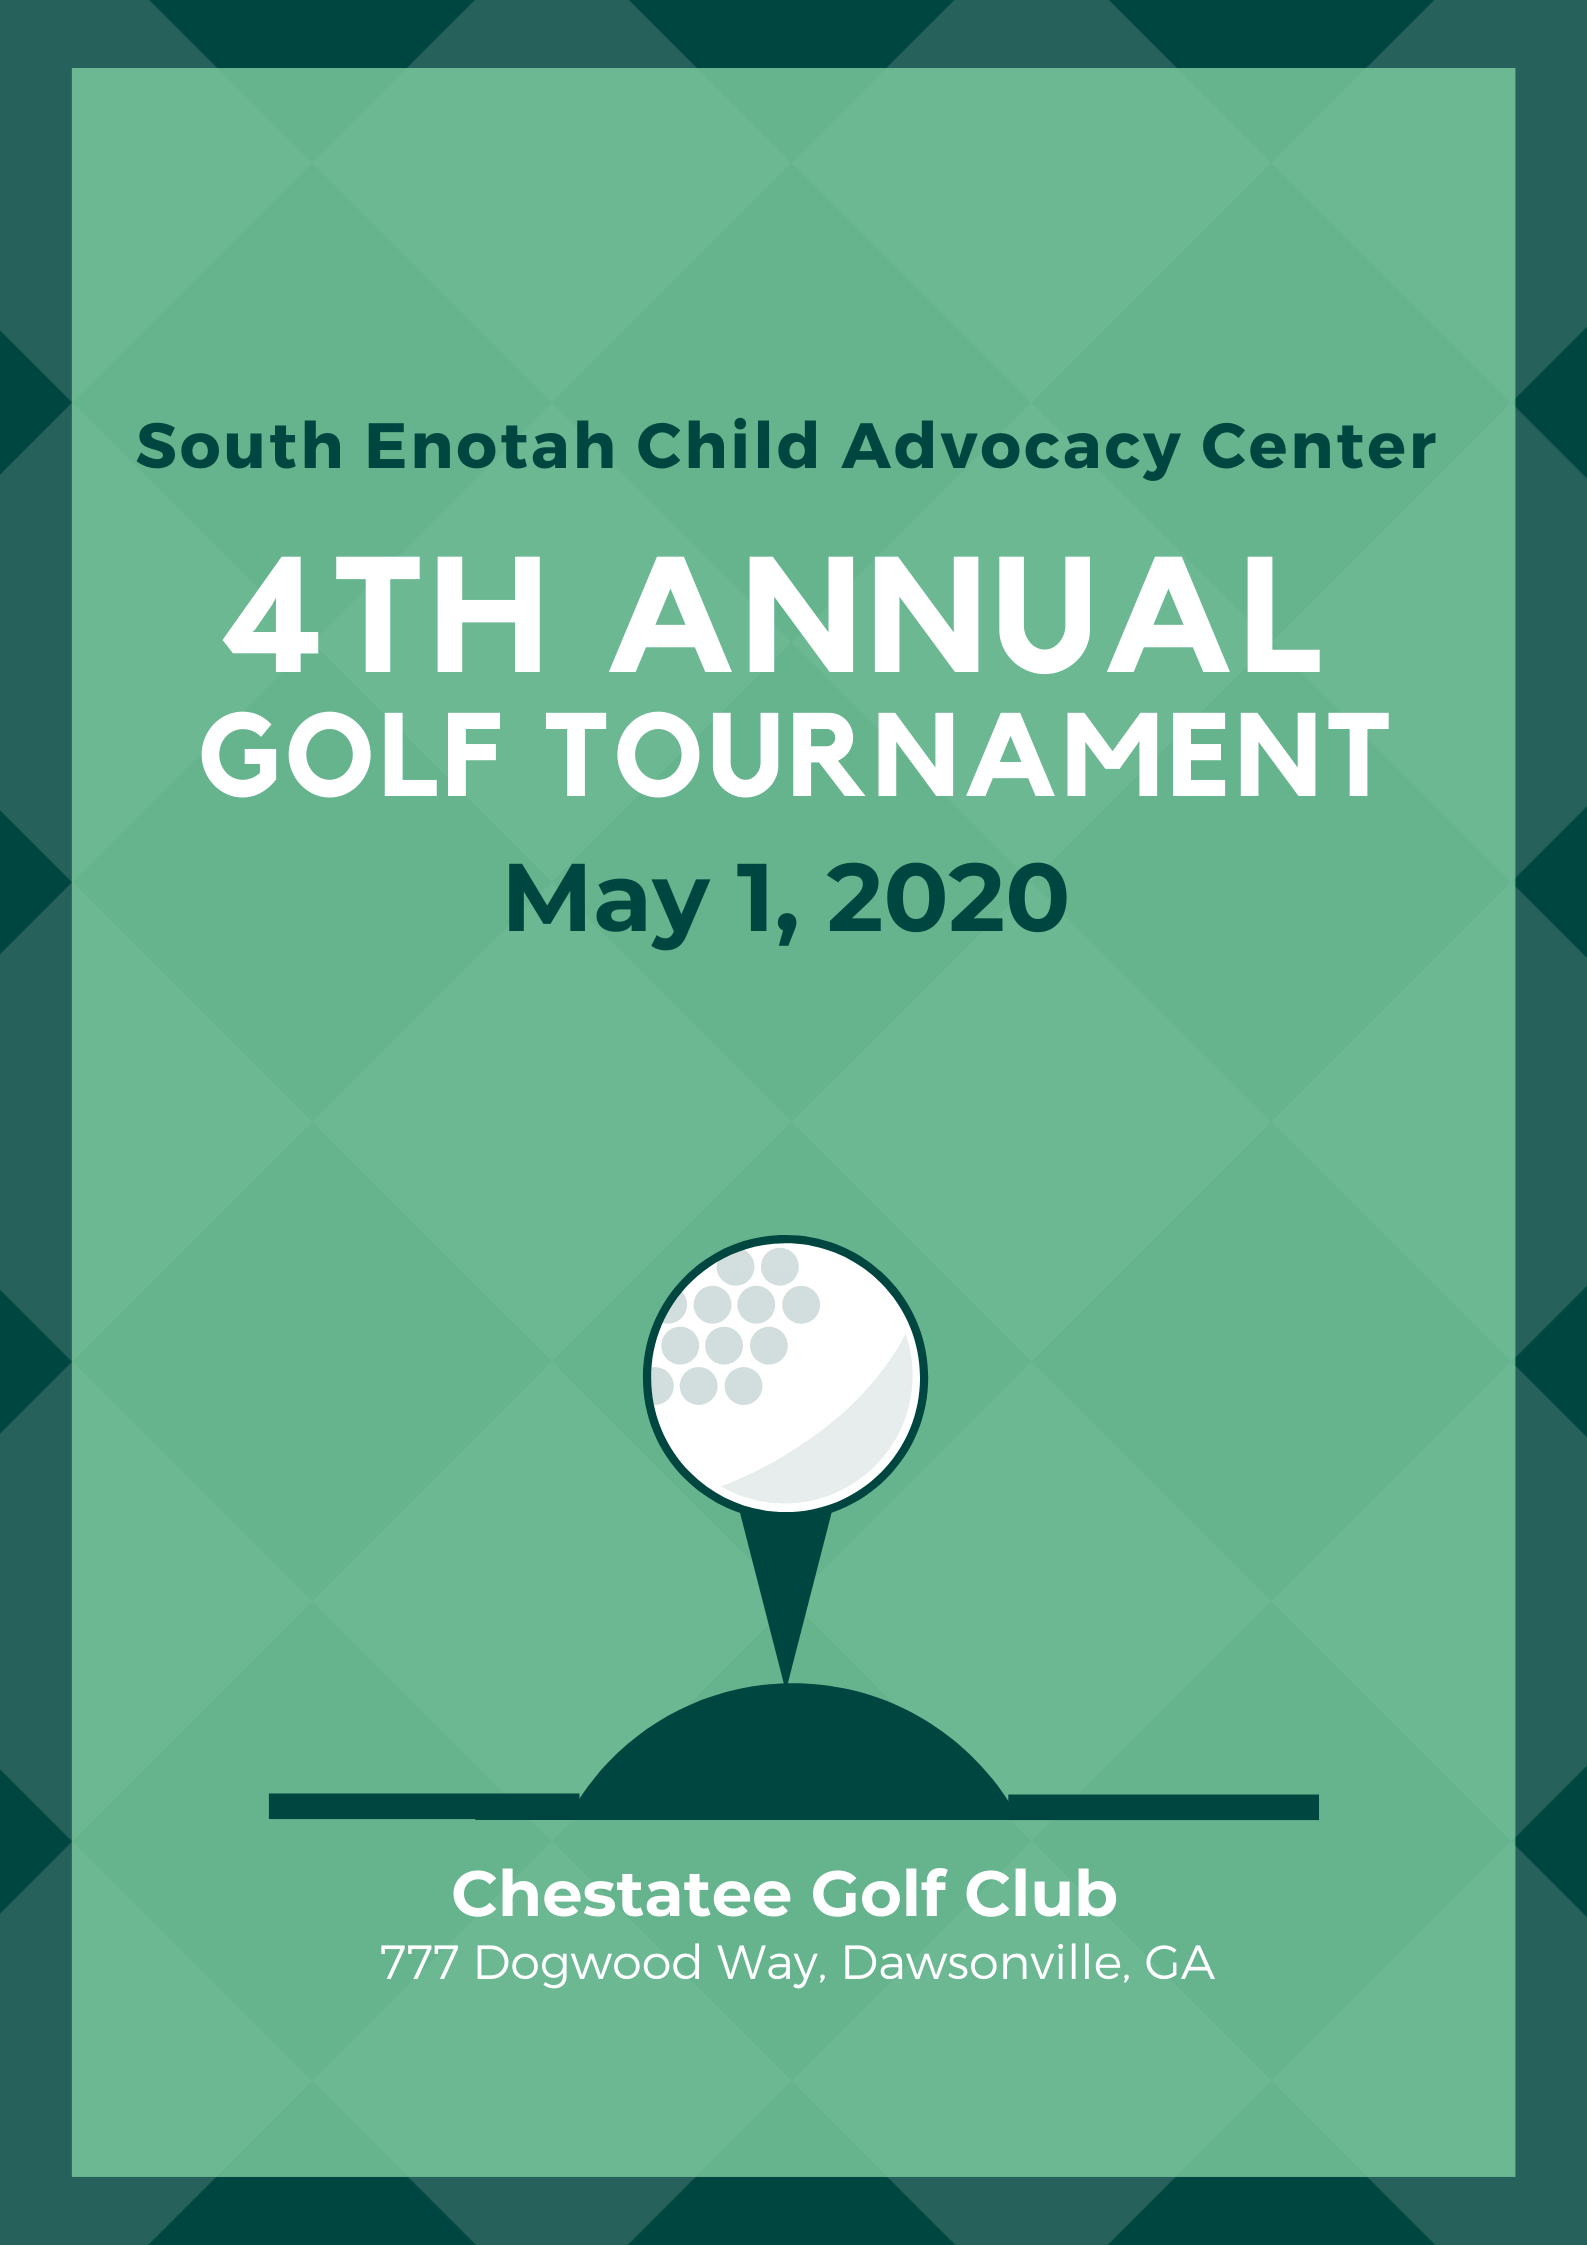 South Enotah Child Advocacy Center's 4th Annual Charity Golf Tournament